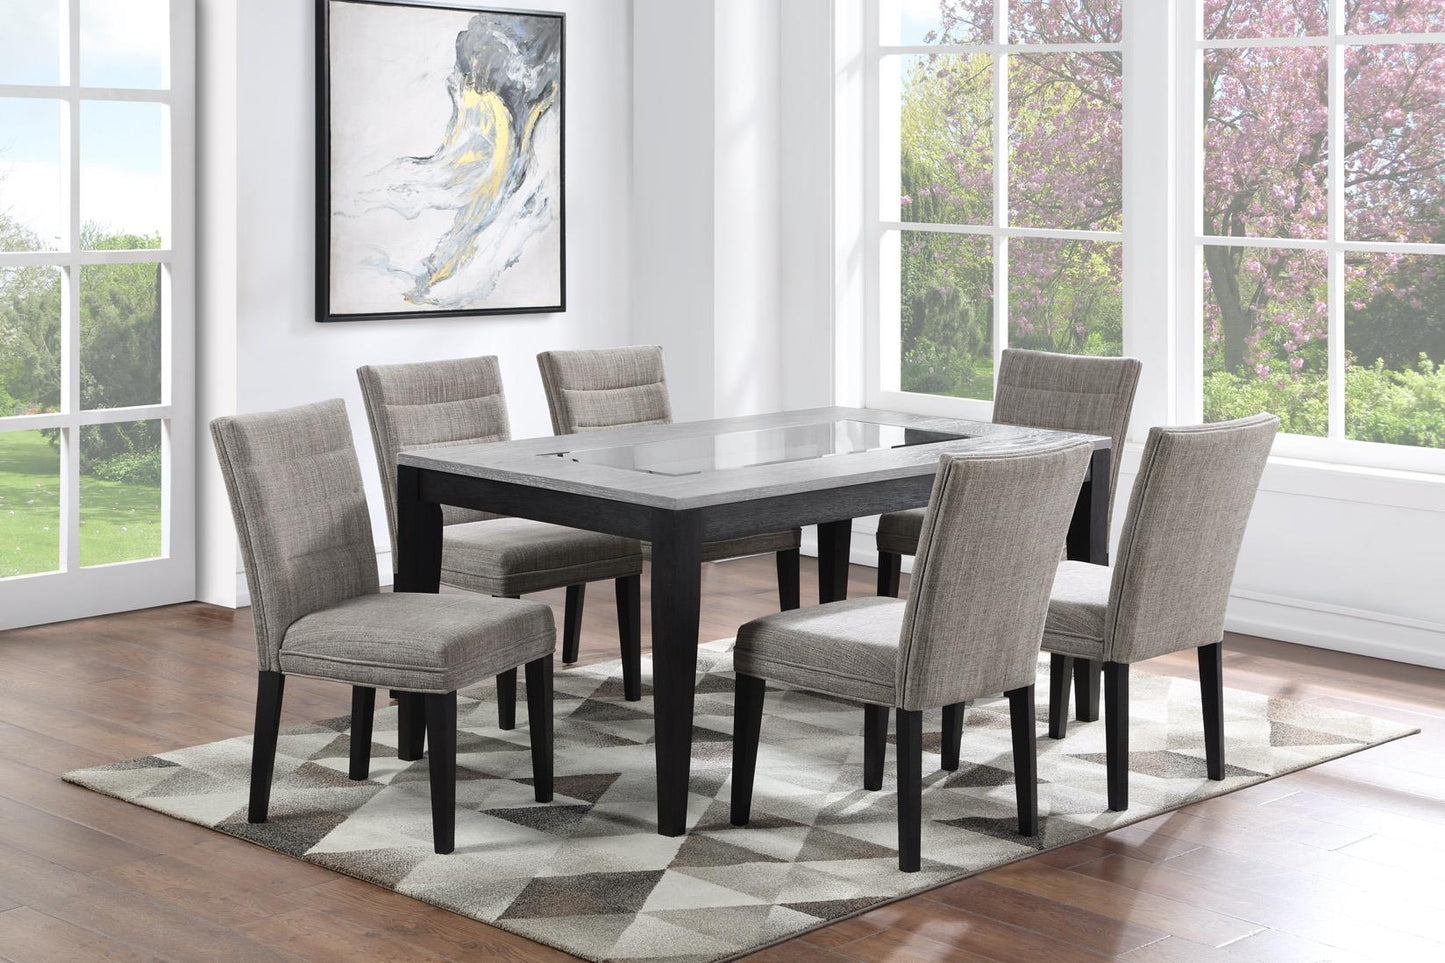 WEEKLY or MONTHLY. Washington Rectangular Table & 6 Side Chairs